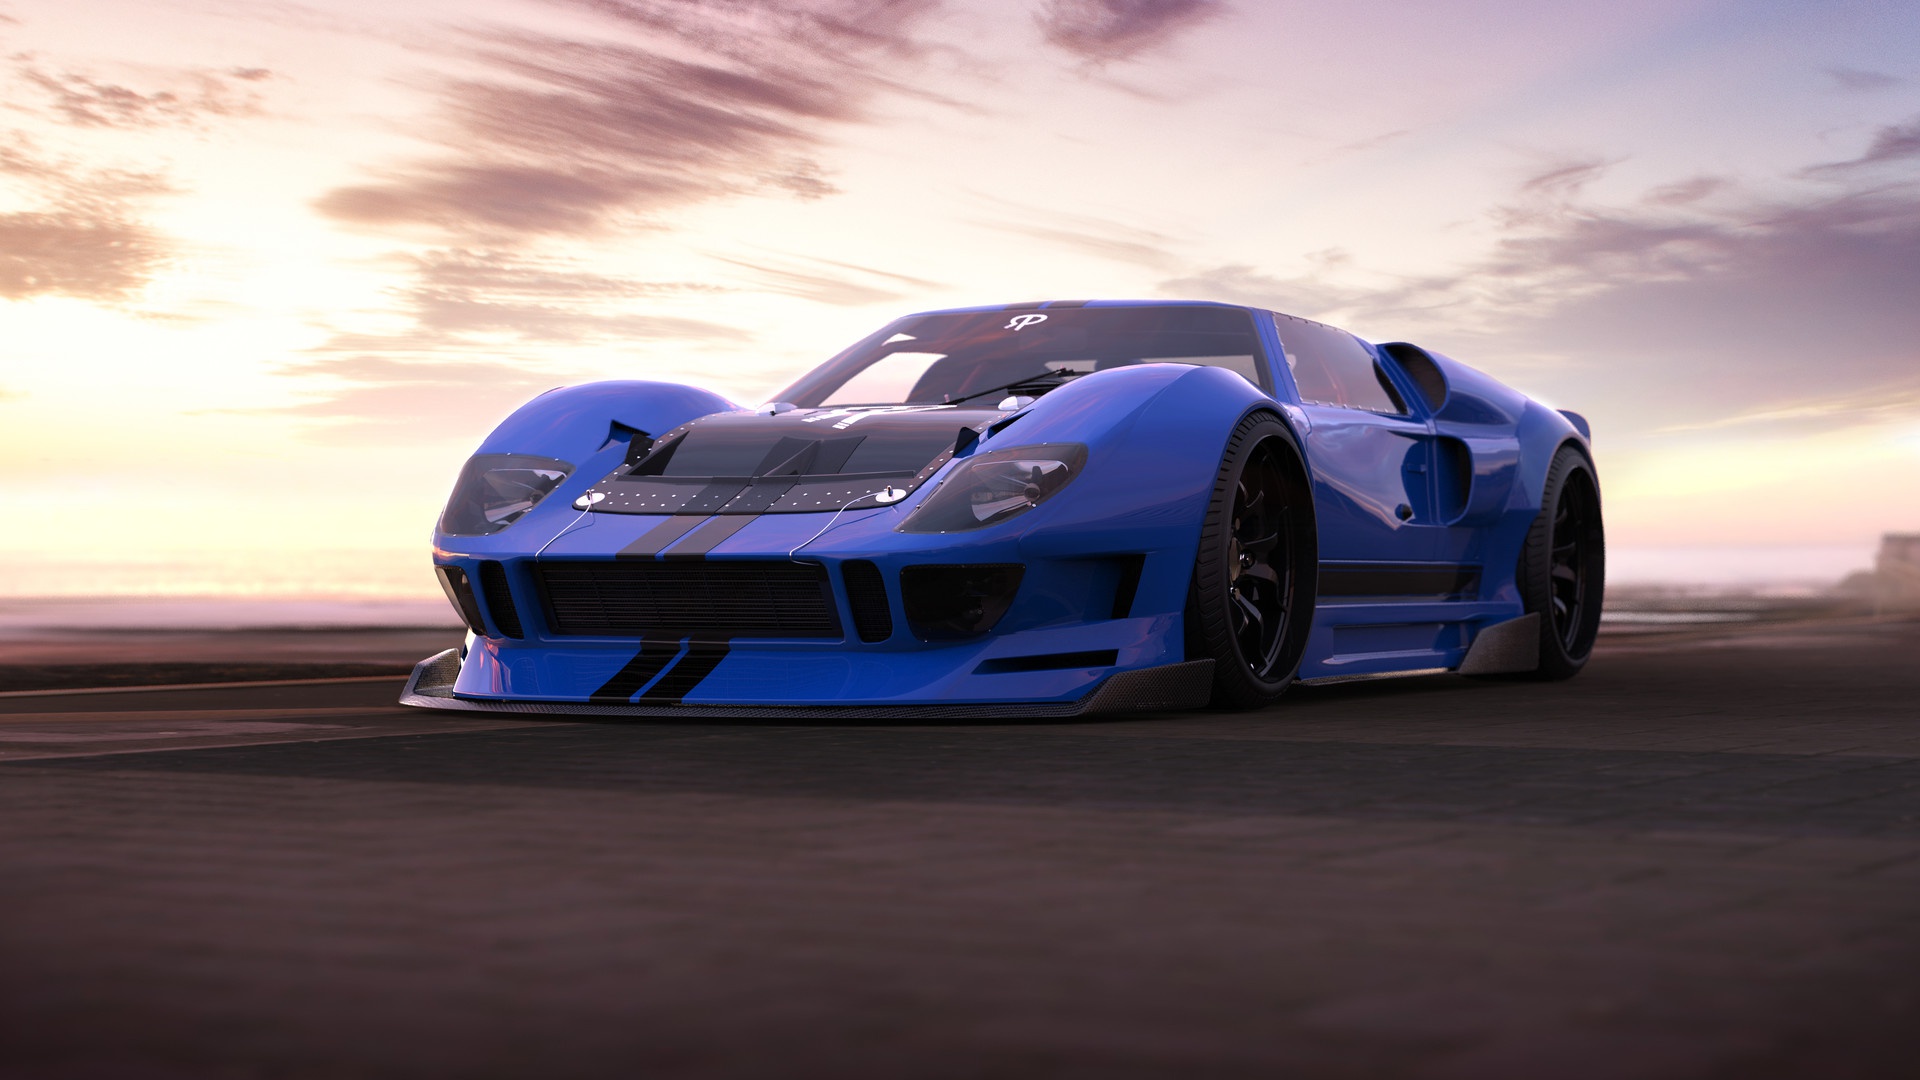 General 1920x1080 Rostislav Prokop car vehicle blue cars Ford Ford GT40 American cars sky racing stripes frontal view clouds